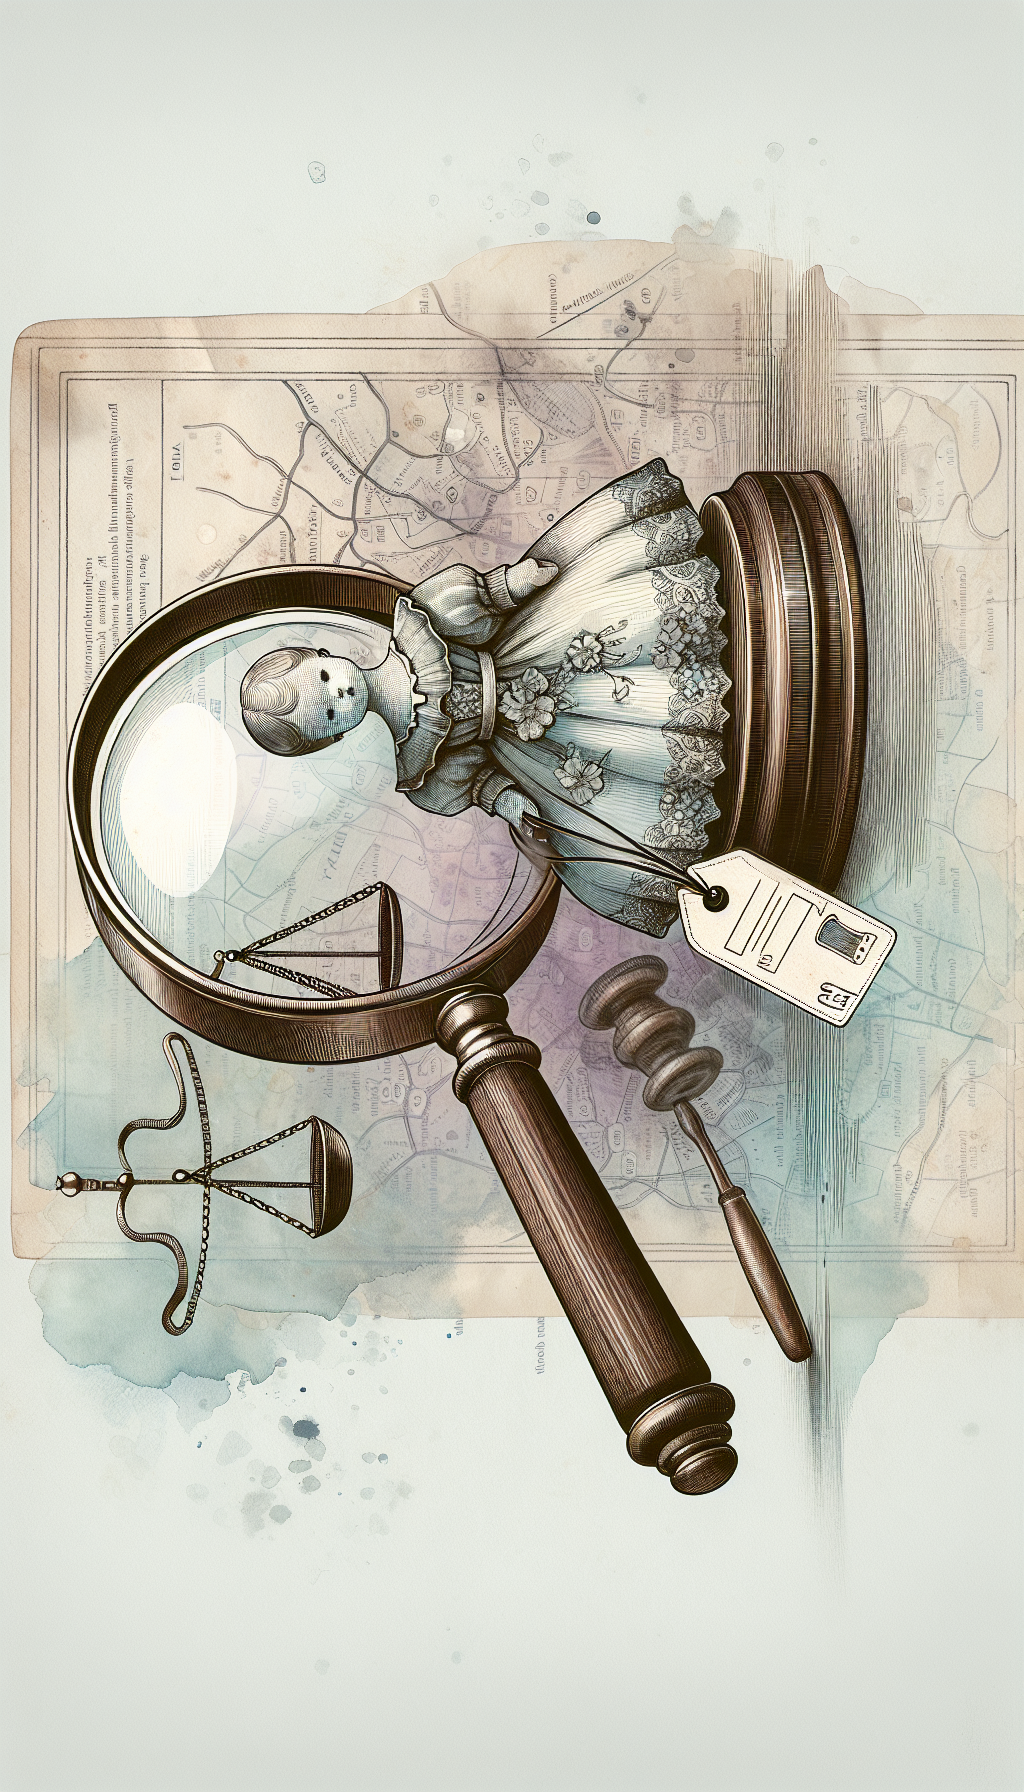 A vintage magnifying glass hovers over a classic, intricately designed antique doll, with the reflection of a gavel to signify the appraisal process. Quaint price tags dangle, hinting at the doll's potential value increase. In the background, a soft, faded map pinpoints a local appraiser, symbolizing the 'near me' concept. The styles interchange between watercolor whimsy for the doll and crisp line art for the magnifying glass and map.